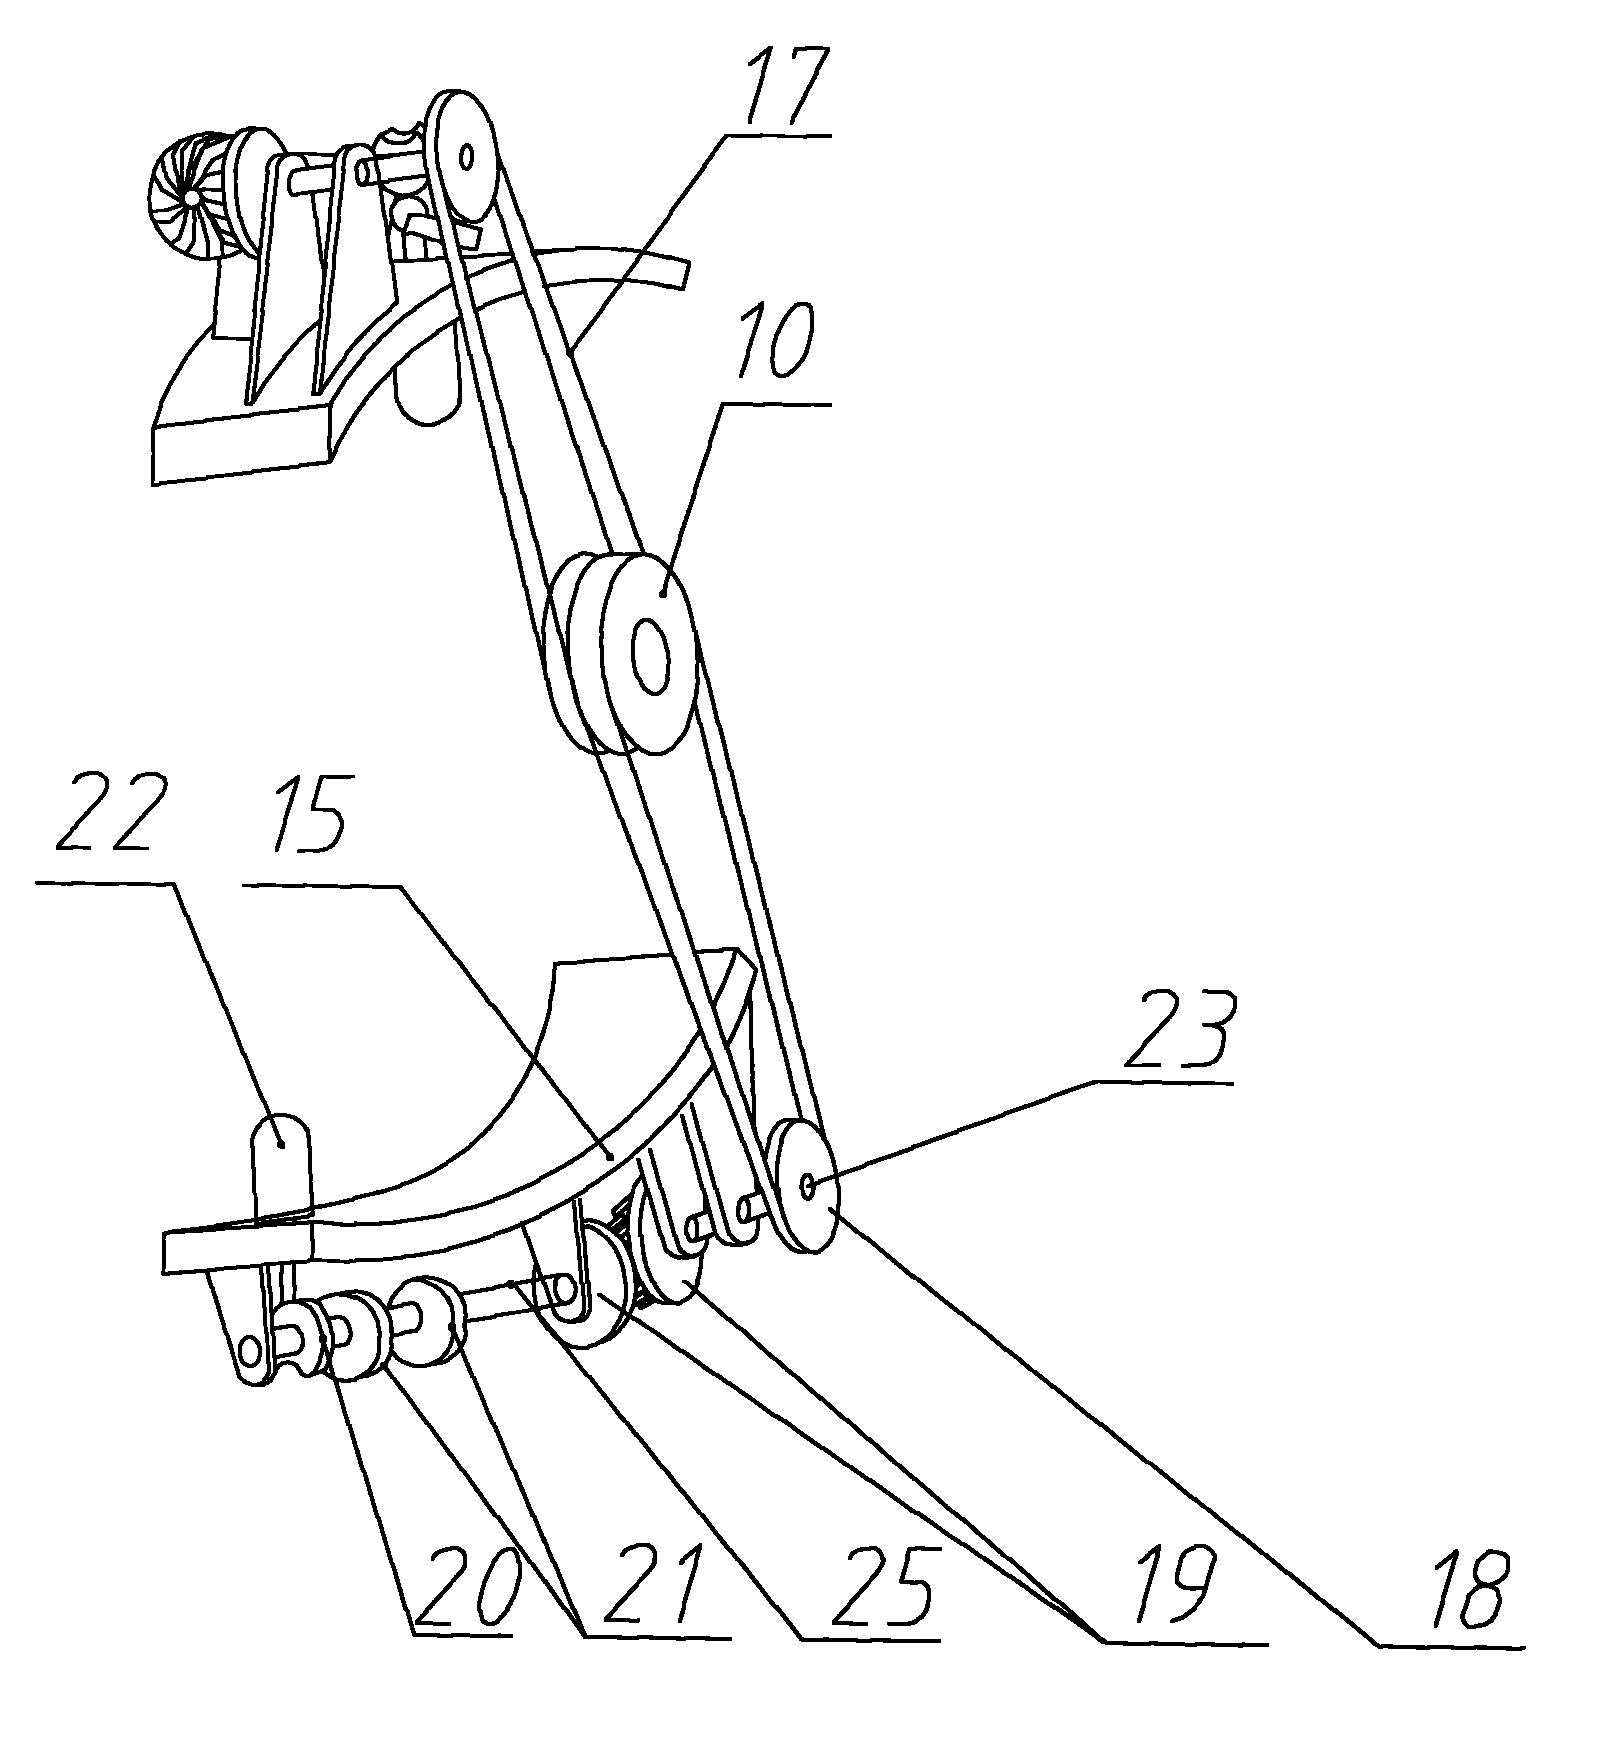 Cam mechanism inside internal combustion engine with piston doing circular motion